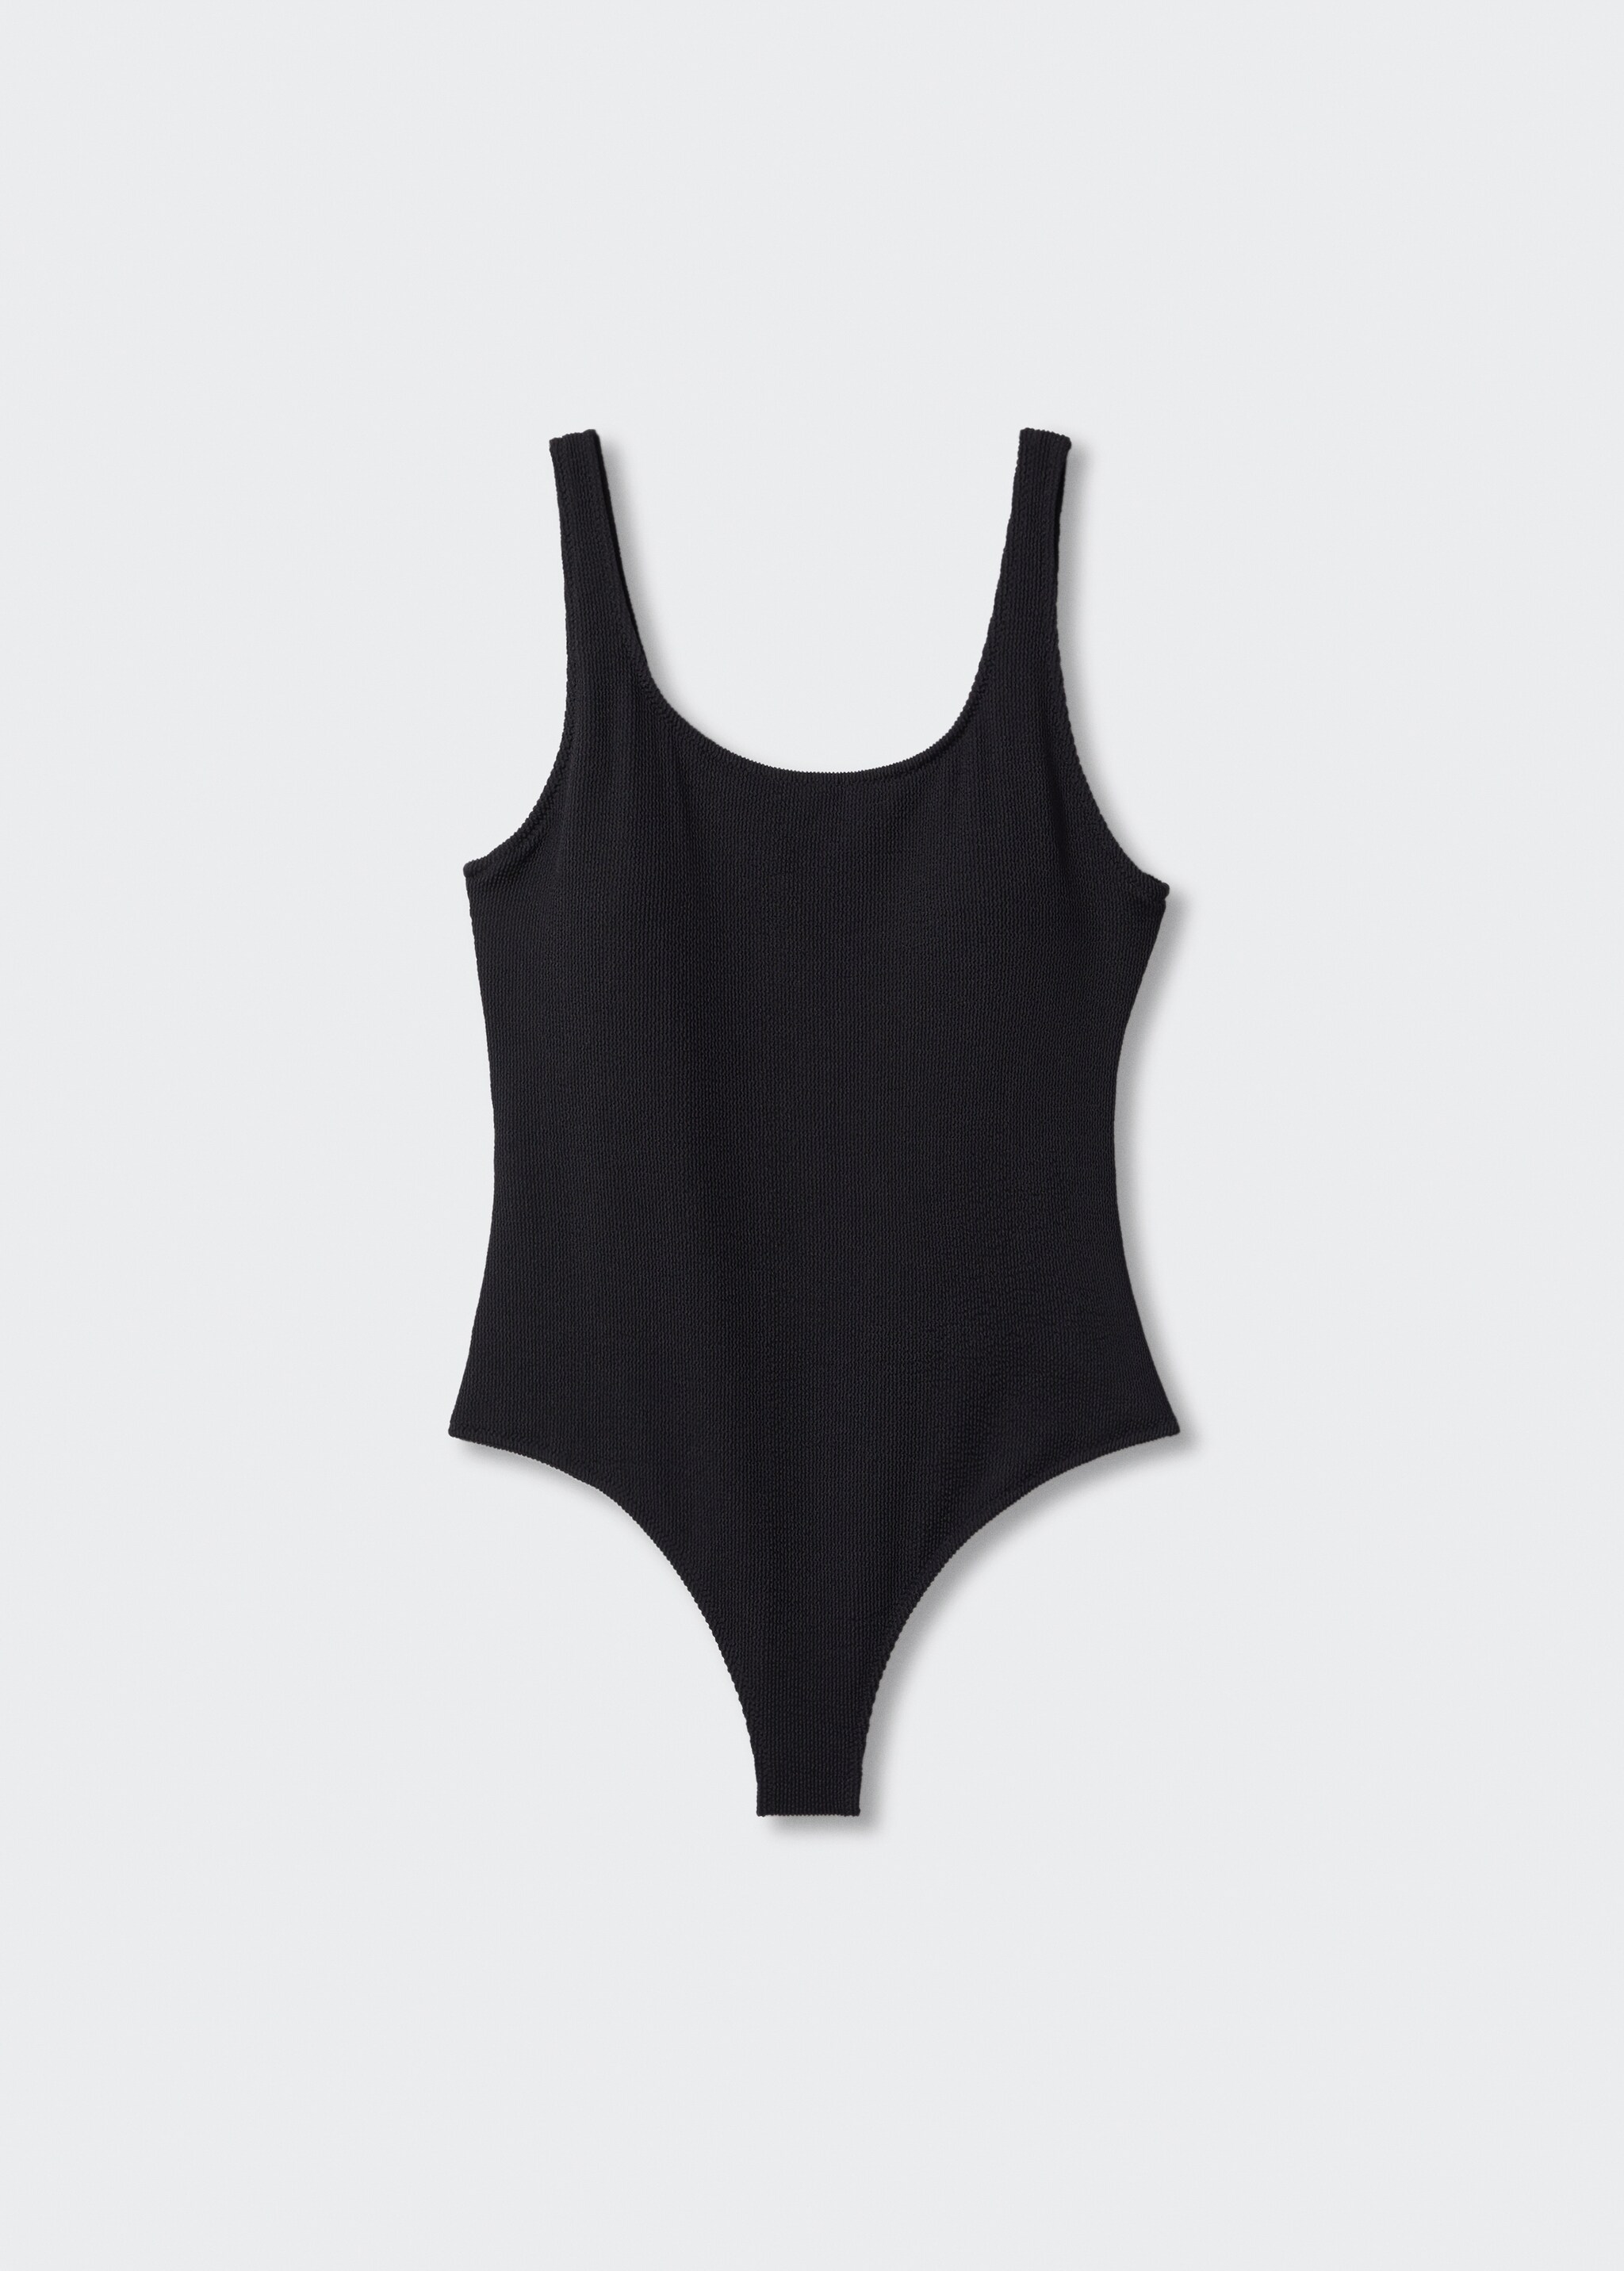 Textured swimsuit - Article without model